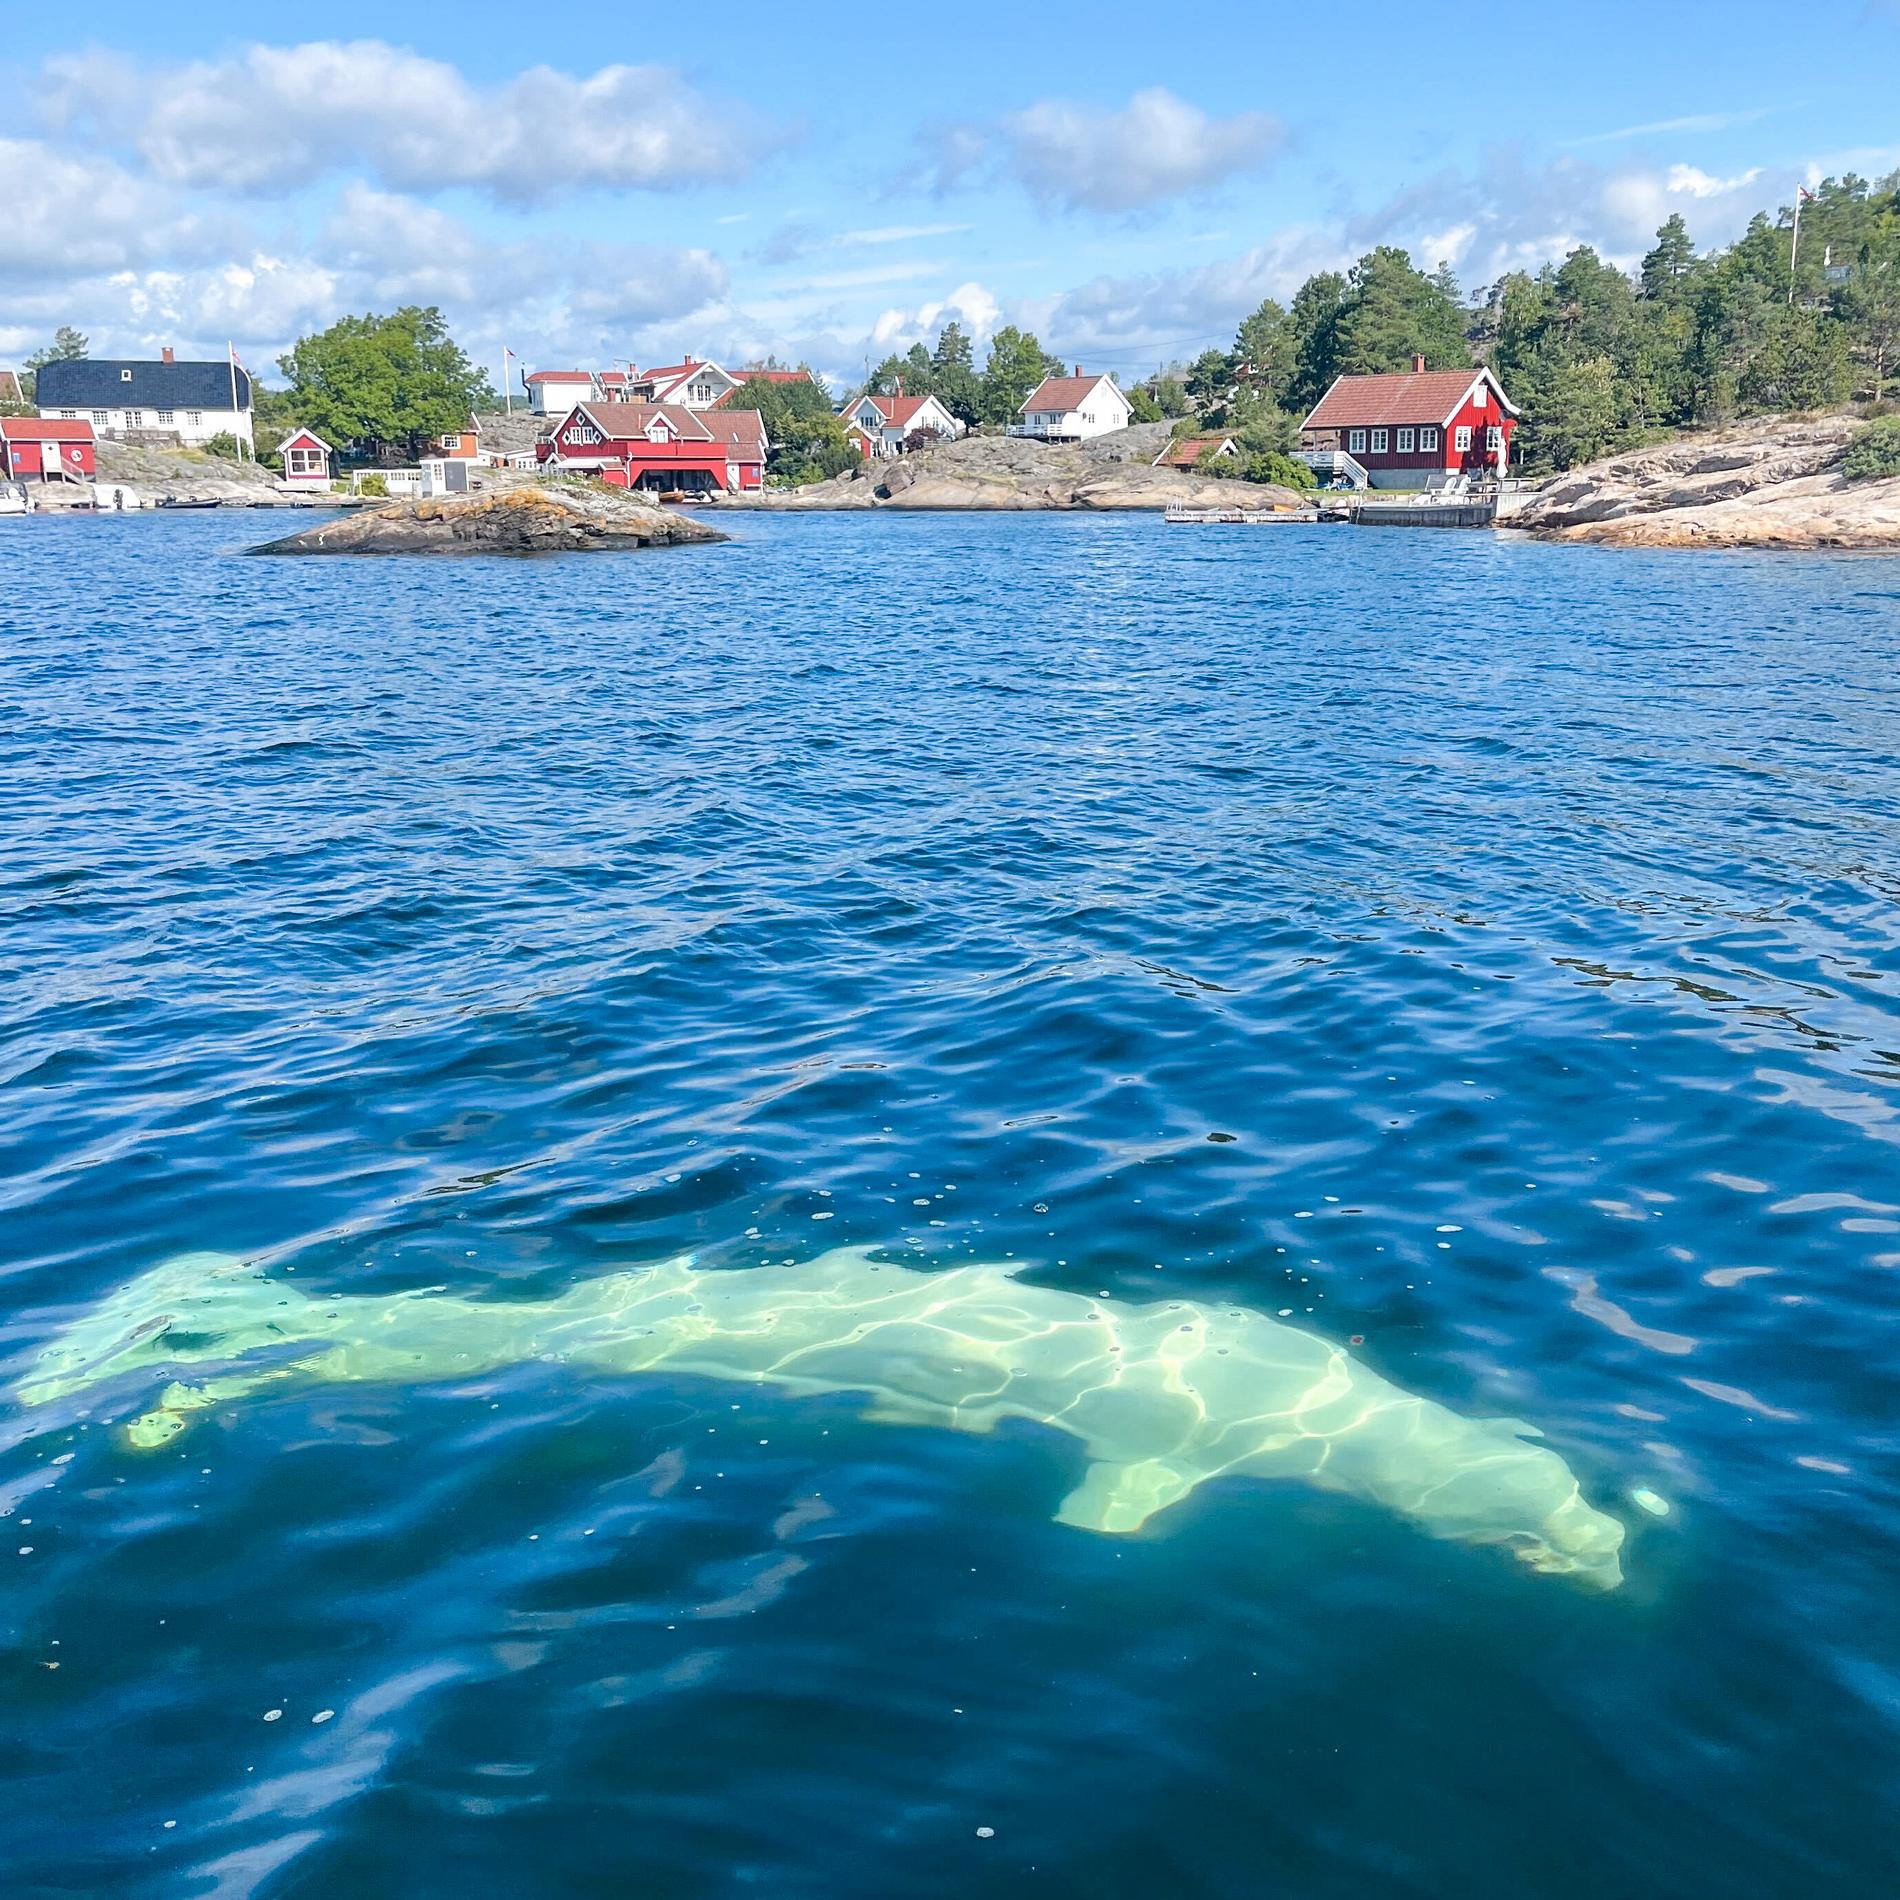 The Godtlund Family’s Memorable Visit with Hvaldimir, the Famous White Whale